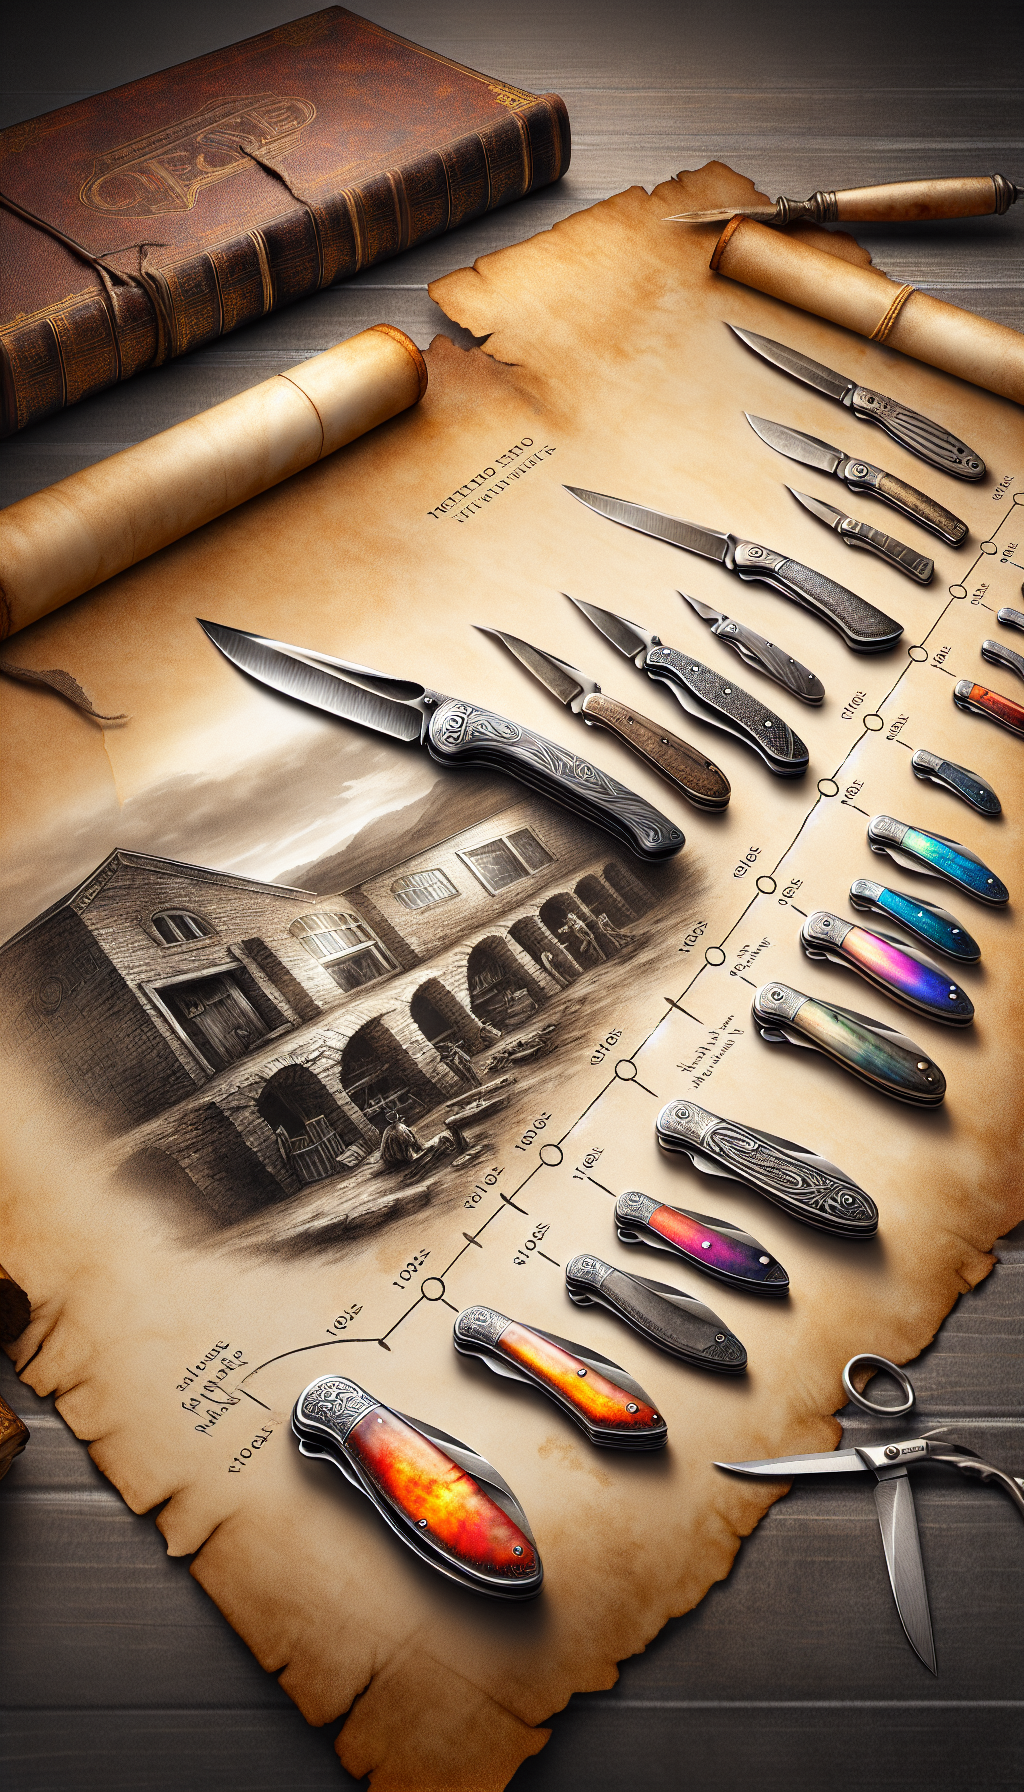 An antique, textured parchment backdrop unfurls to showcase a timeline, with etched milestones depicting key historical moments of Case knives. At the start, a sepia-toned forge illustrates the brand’s inception. Along the timeline, a vibrant watercolor of rare, pristine Case knives glistens, highlighting their growing value, culminating in a shimmering, metallic 3D model of the most coveted vintage case knife.